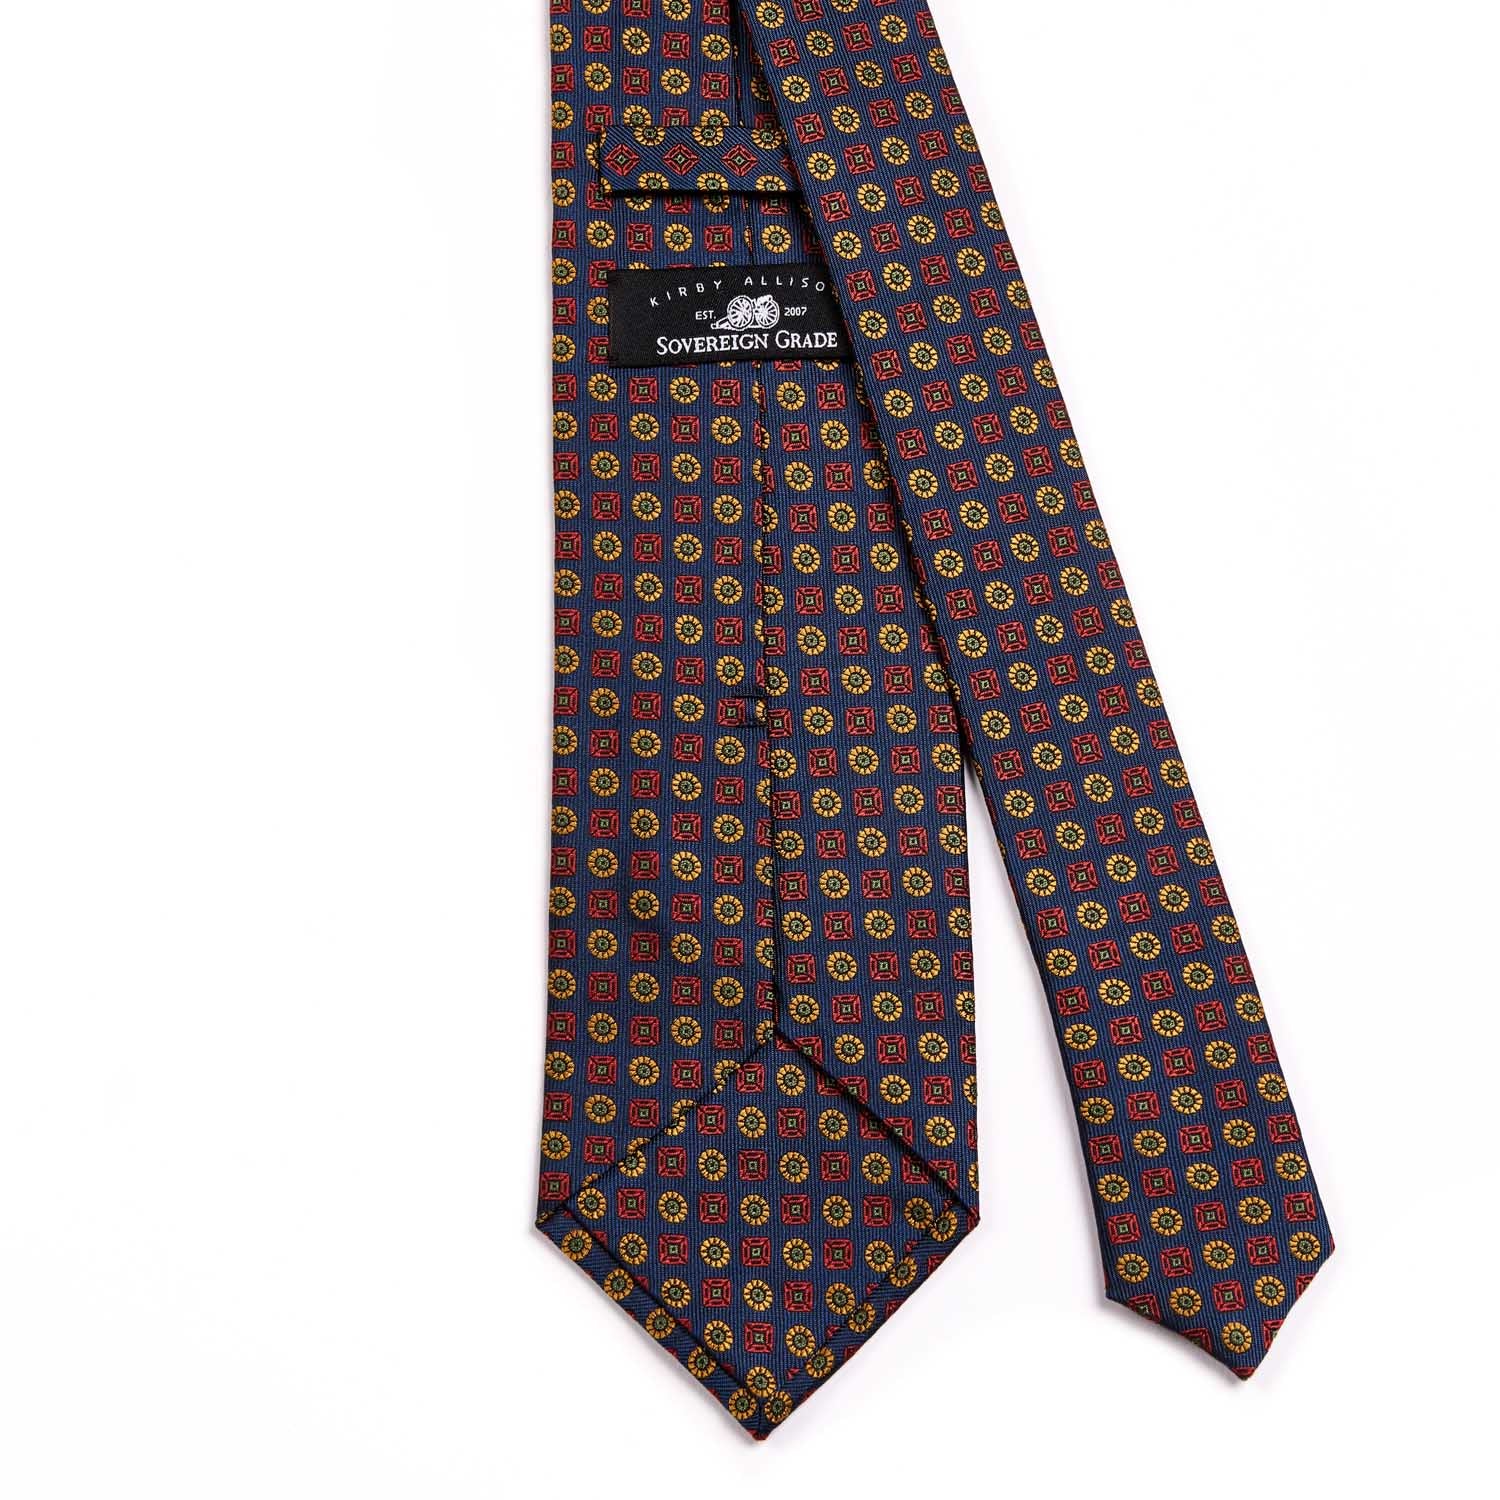 A KirbyAllison.com Sovereign Grade Navy Floral Jacquard Tie, 150 cm with a colorful pattern made in the United Kingdom.